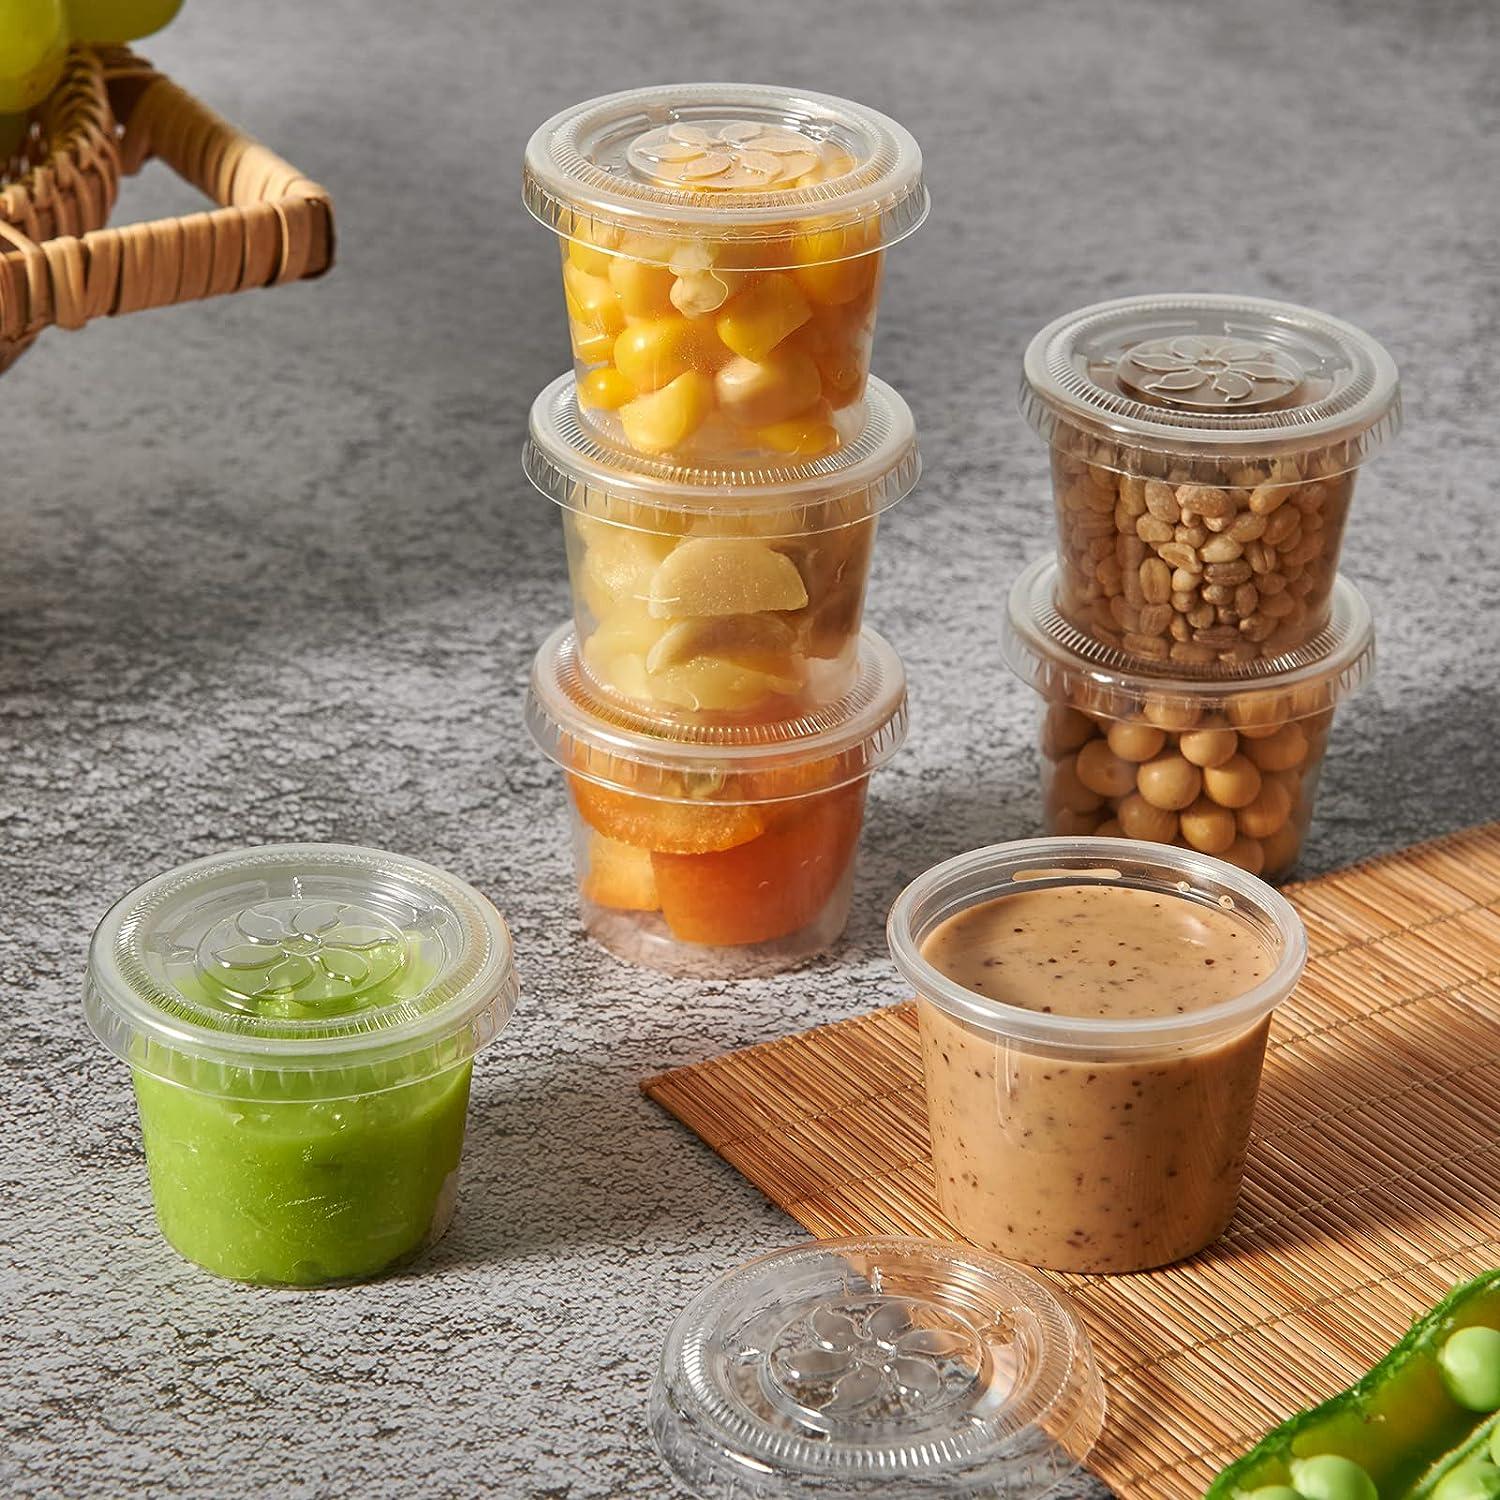 Condiment Cups Containers with Lids- 8 pk. 1.3 oz.Salad Dressing Container  to go Small Food Storage Containers with Lids- Sauce Cups Leak proof